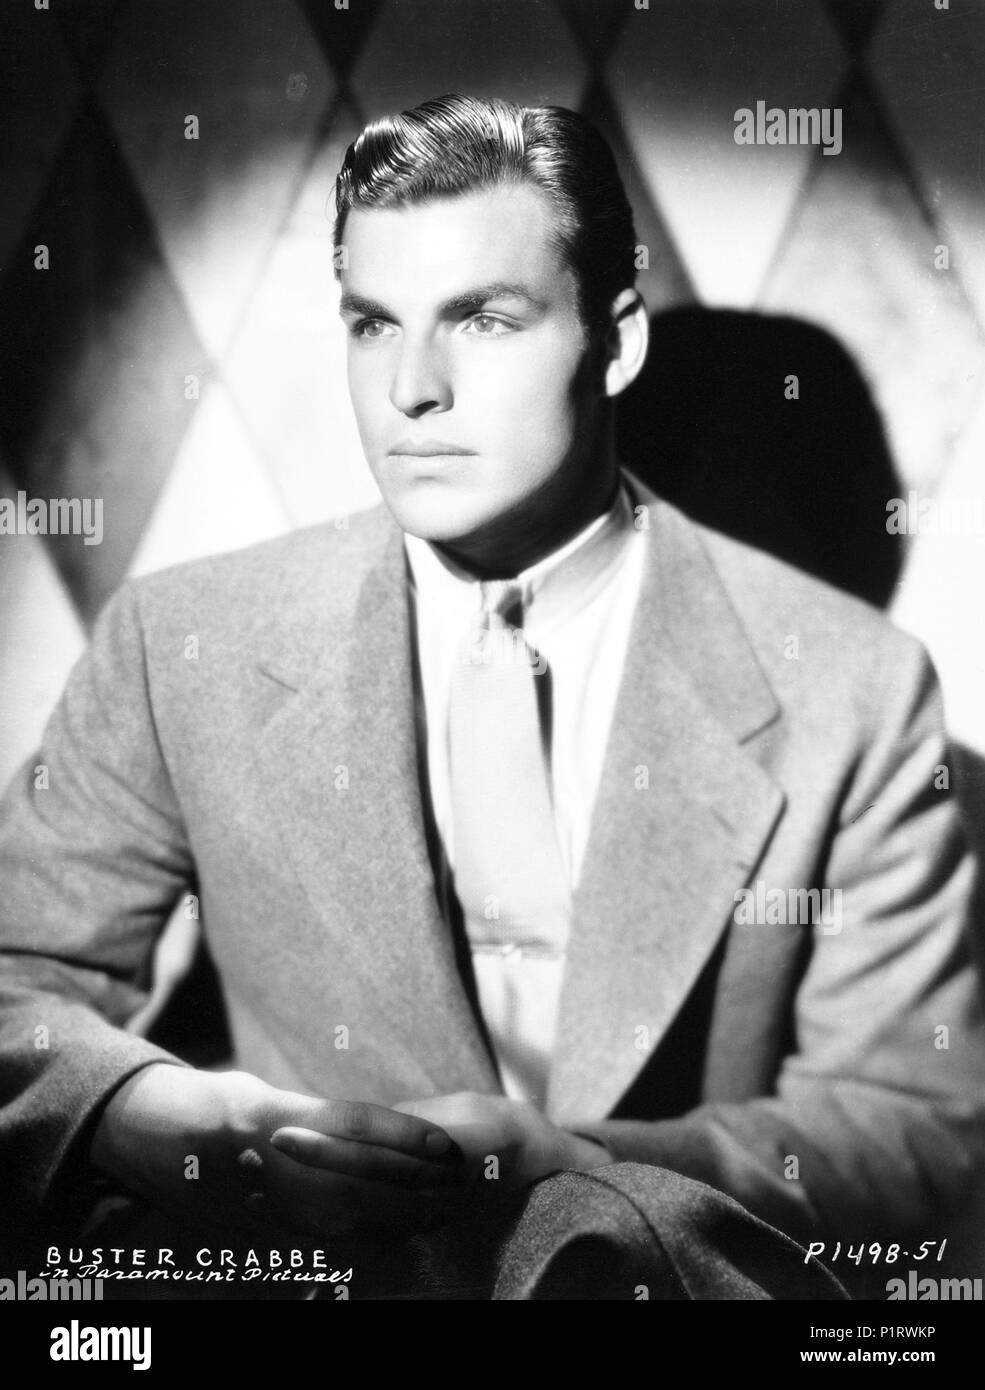 Buster Crabbe - Turner Classic Movies